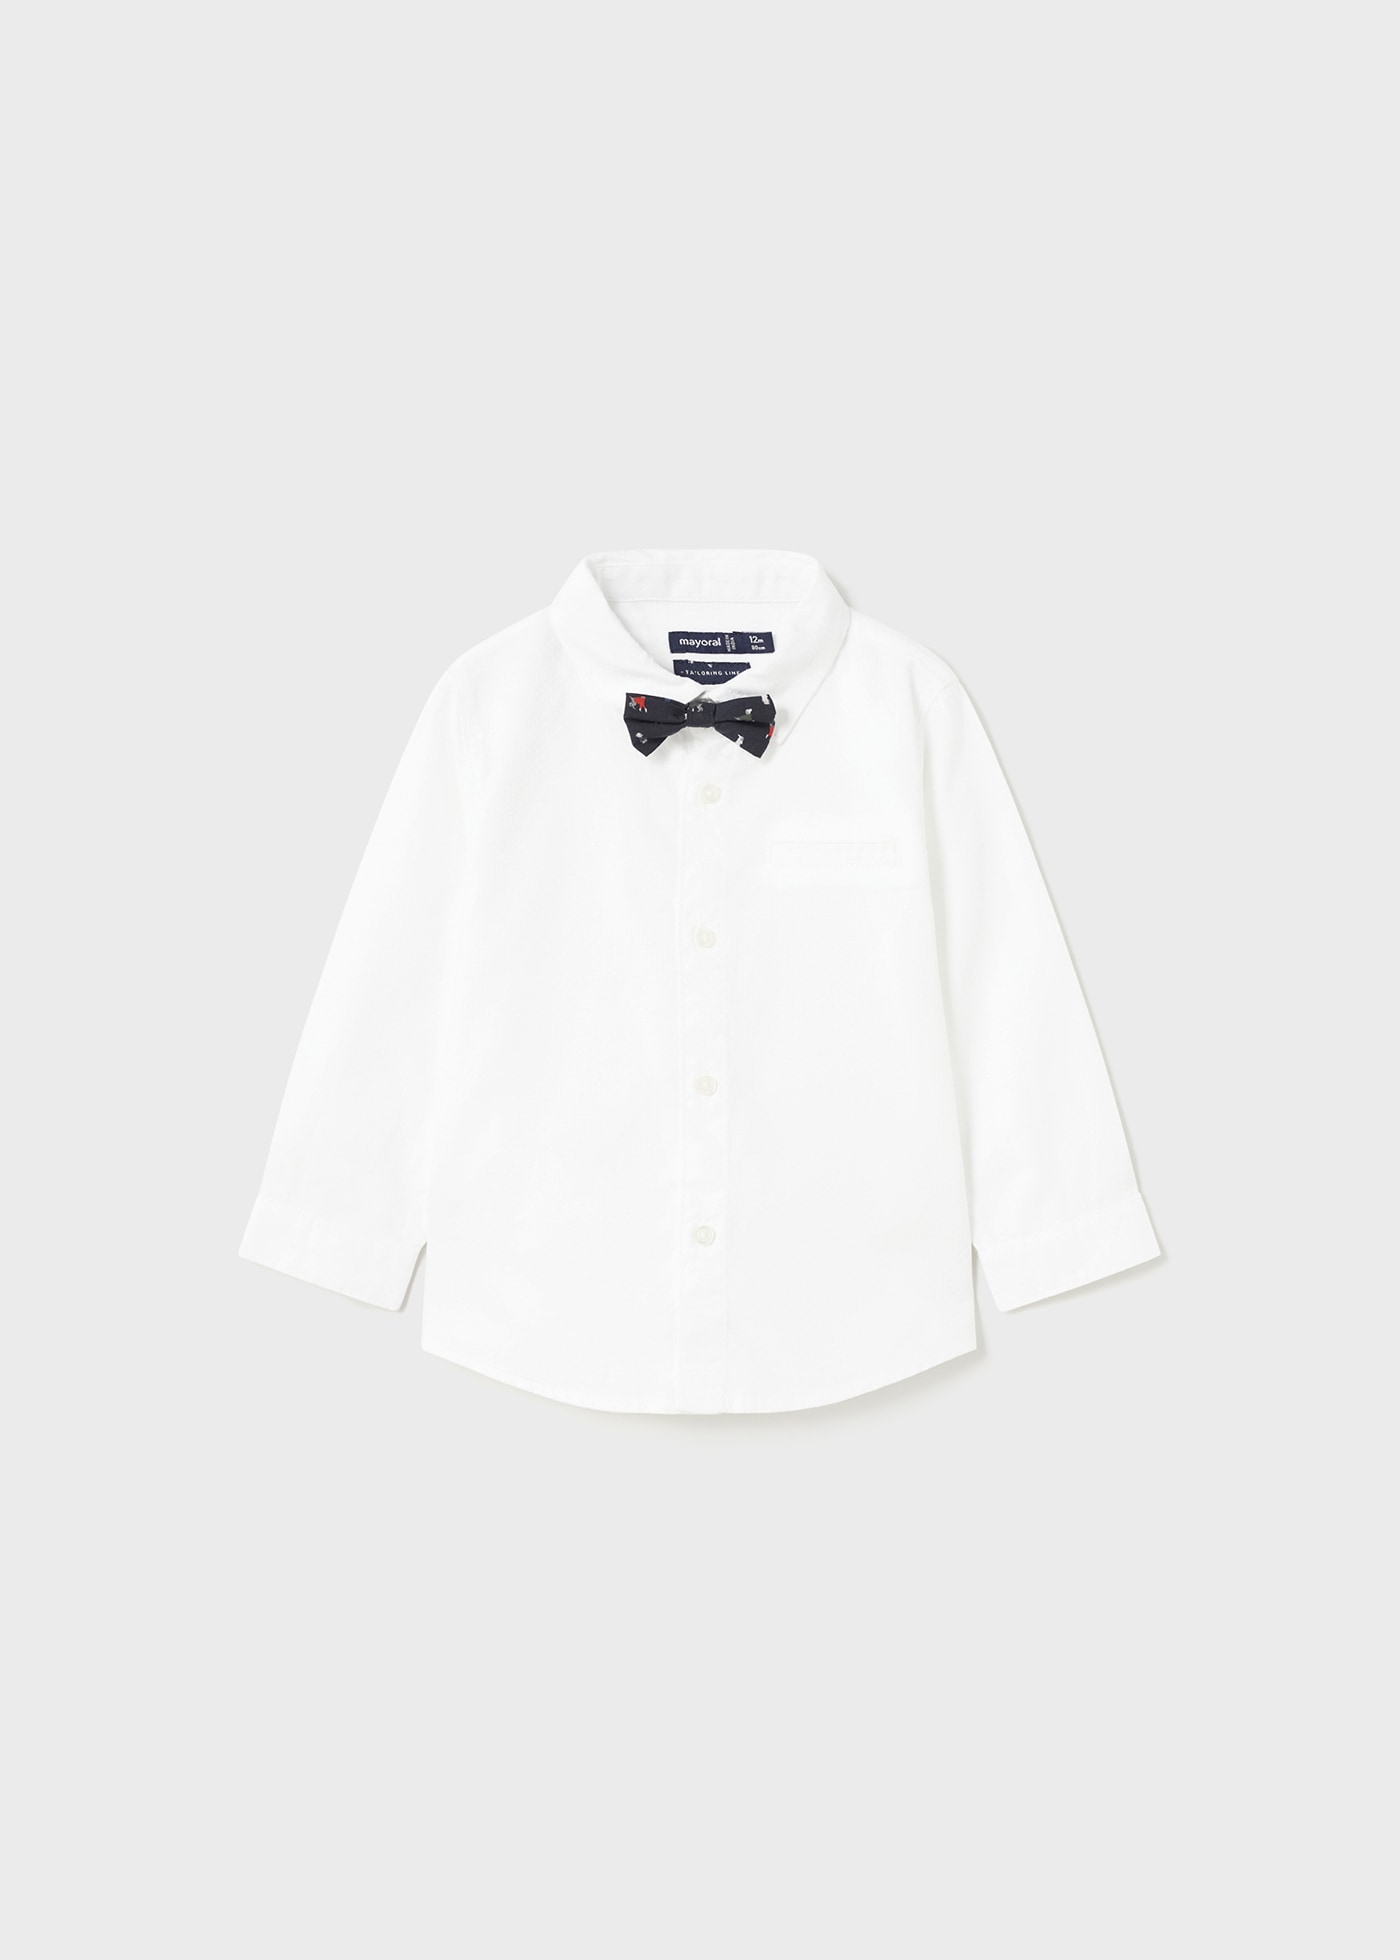 Baby cotton shirt with detachable bow tie Better Cotton